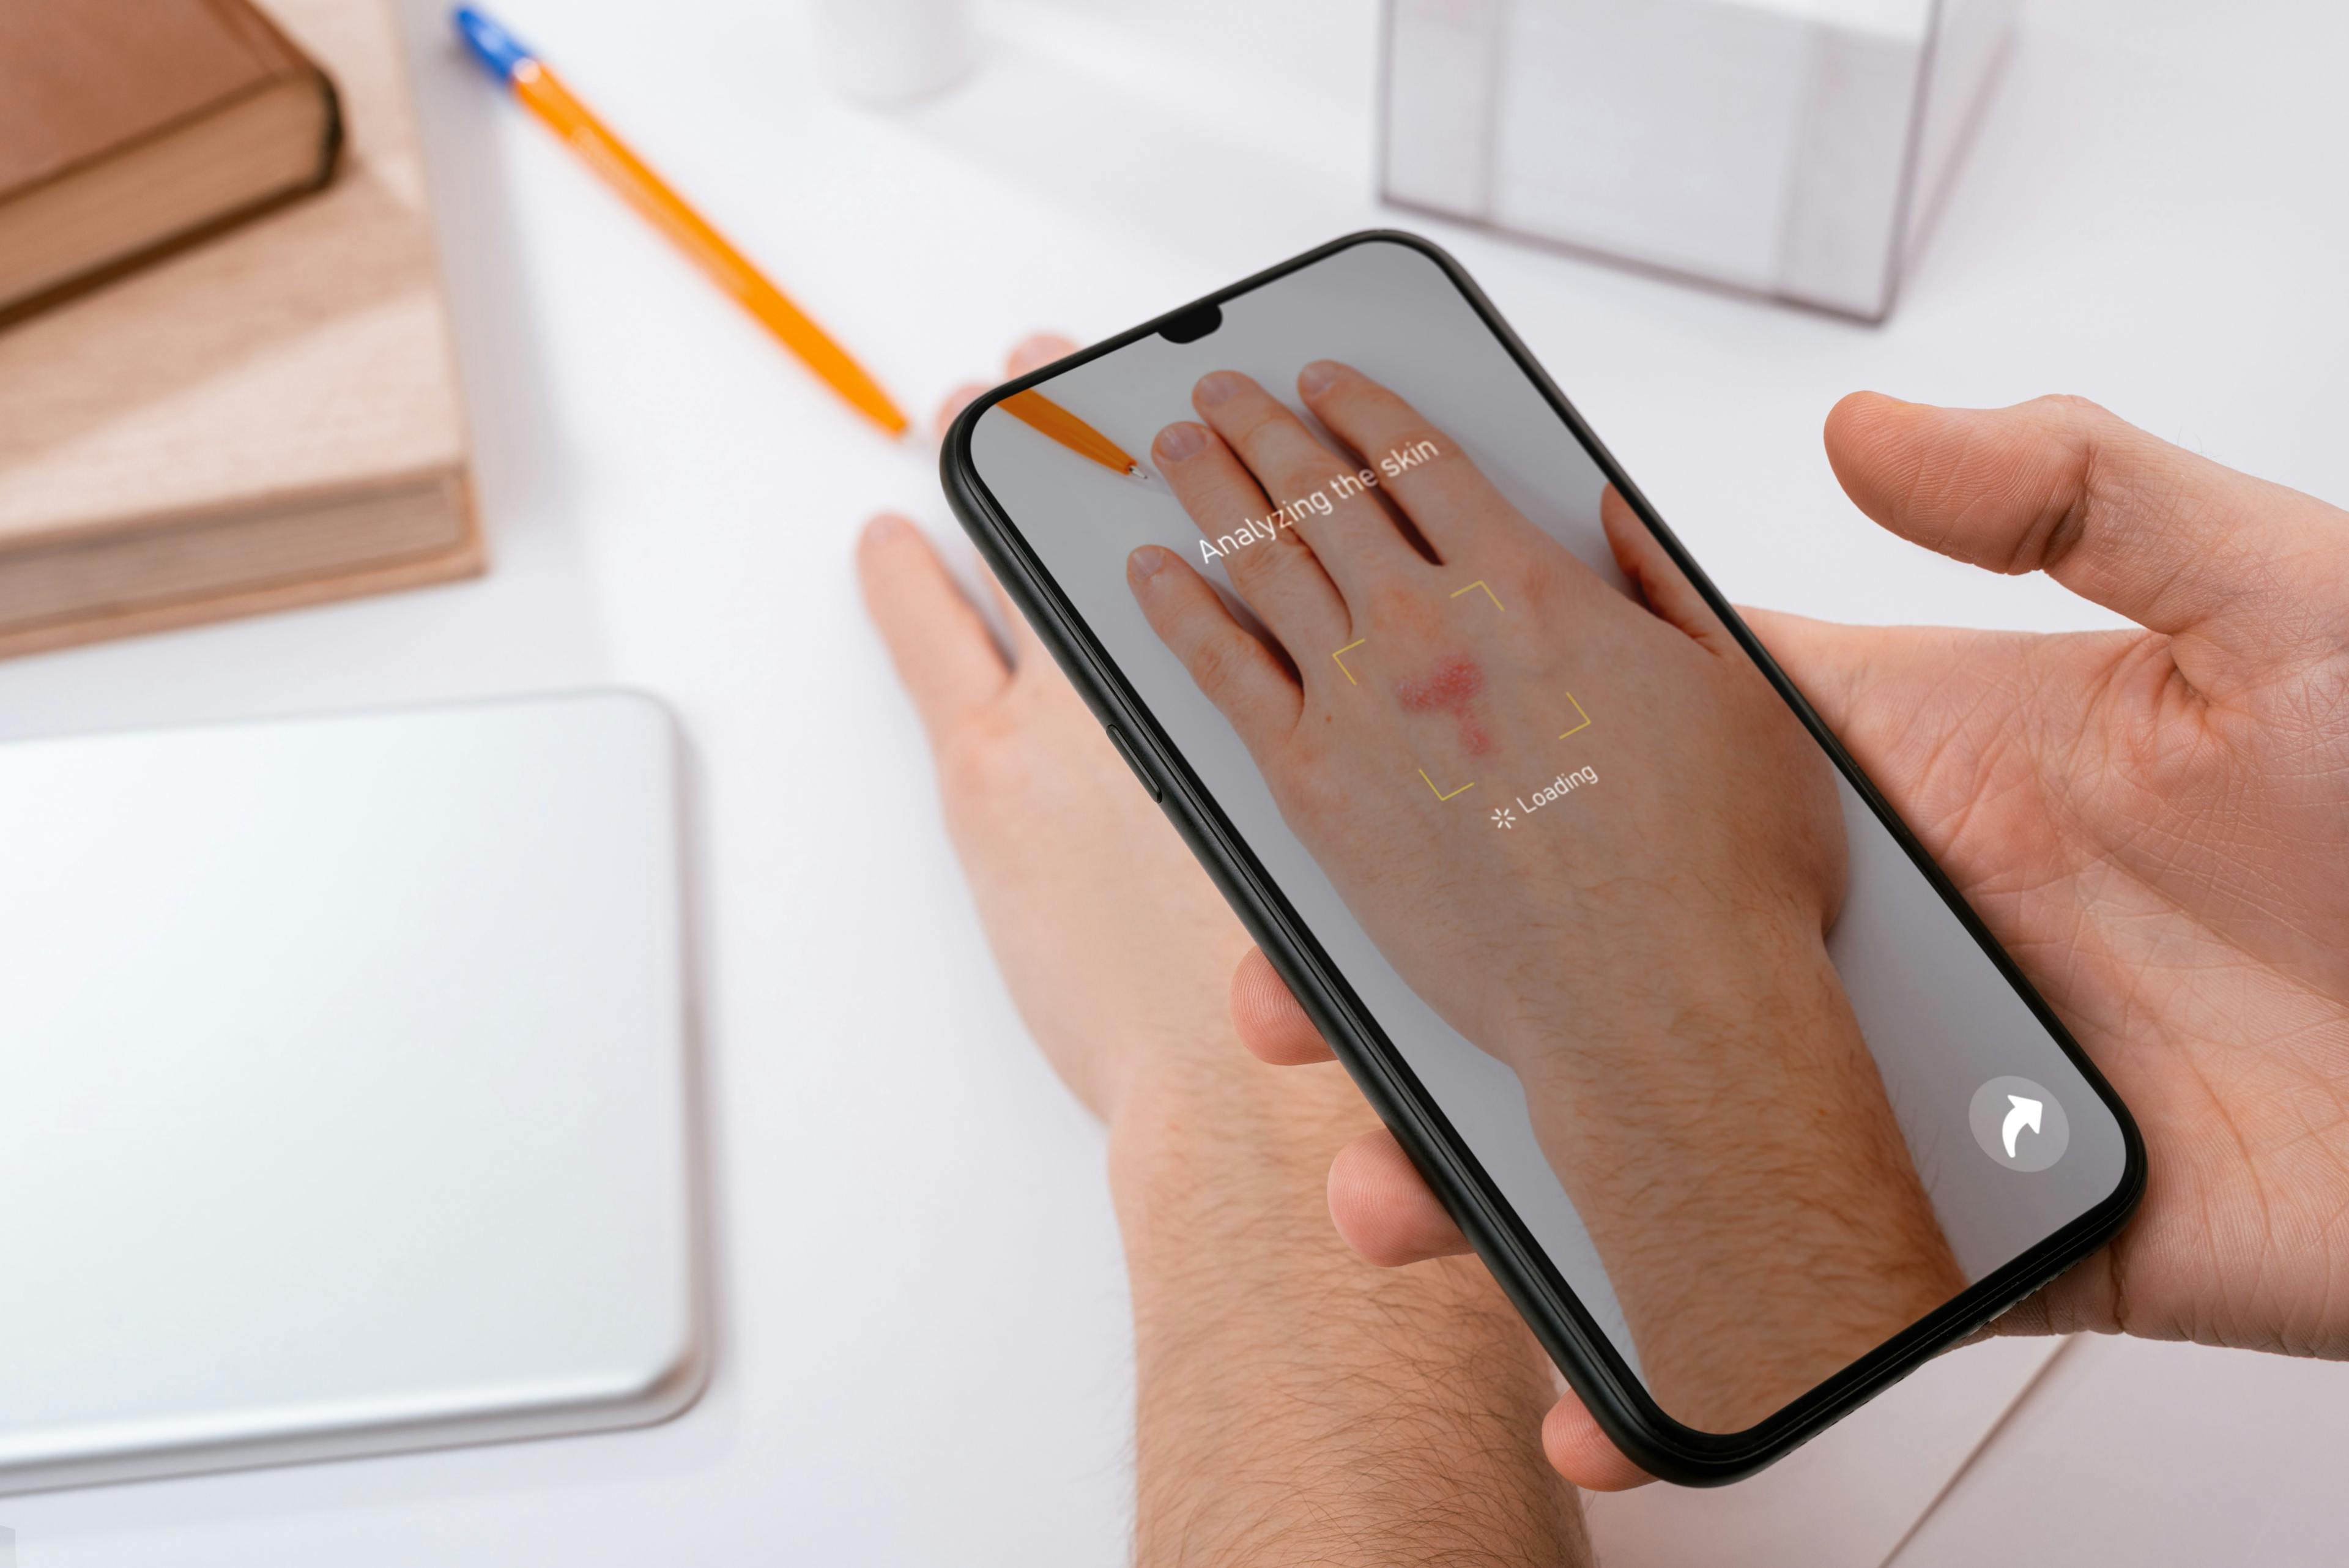 Person holds phone over hand to scan for skin issue using an app.